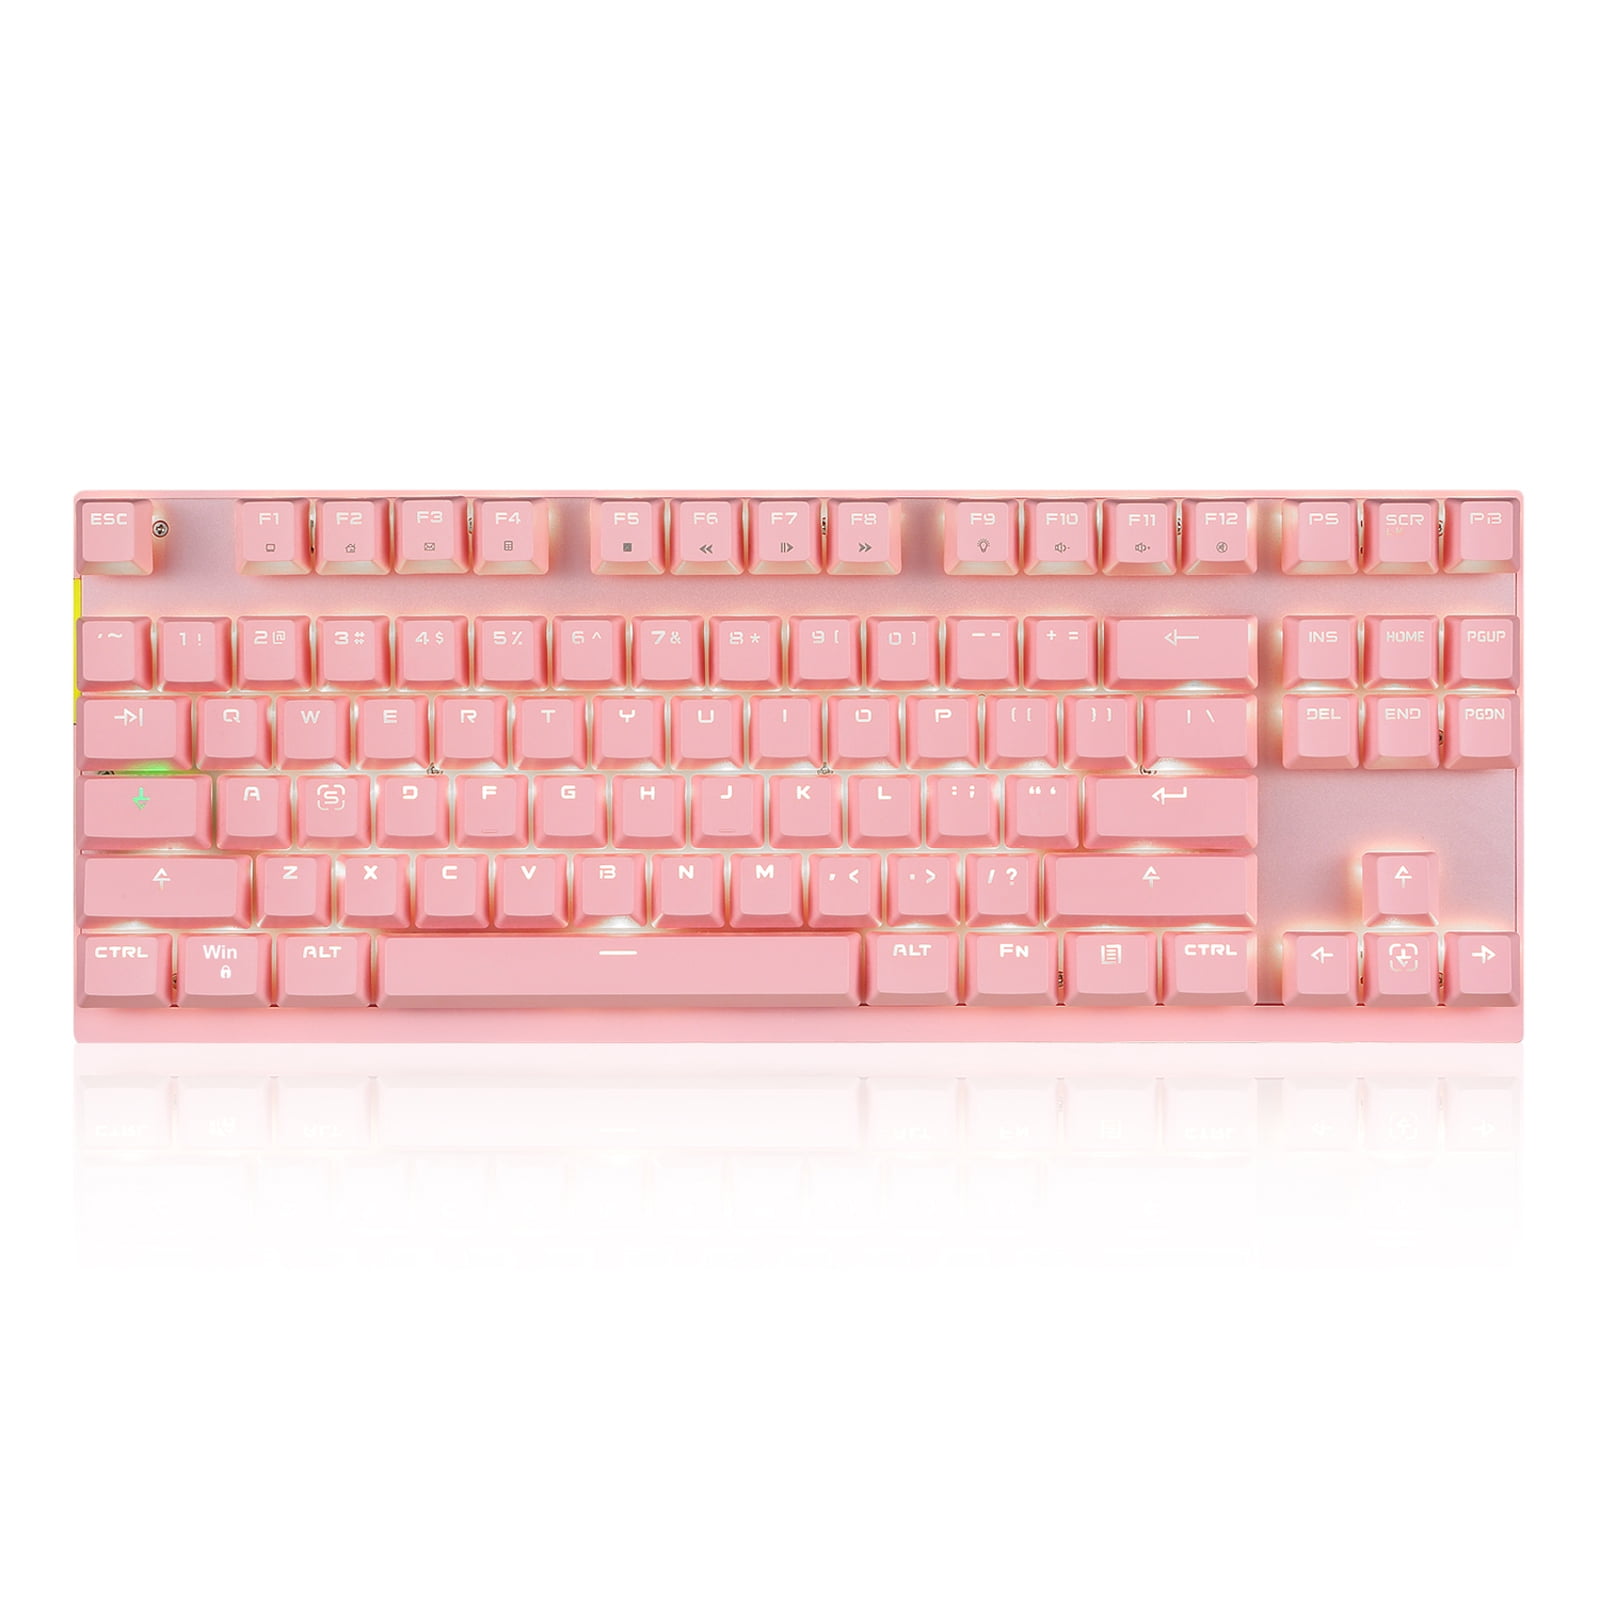 Andoer Motospeed 2.4GHz Wireless/Wired Mechanical Gaming Keyboard White Backlit, Type-C for Mac/PC/Laptop-87 Key Blue Switches in Pink